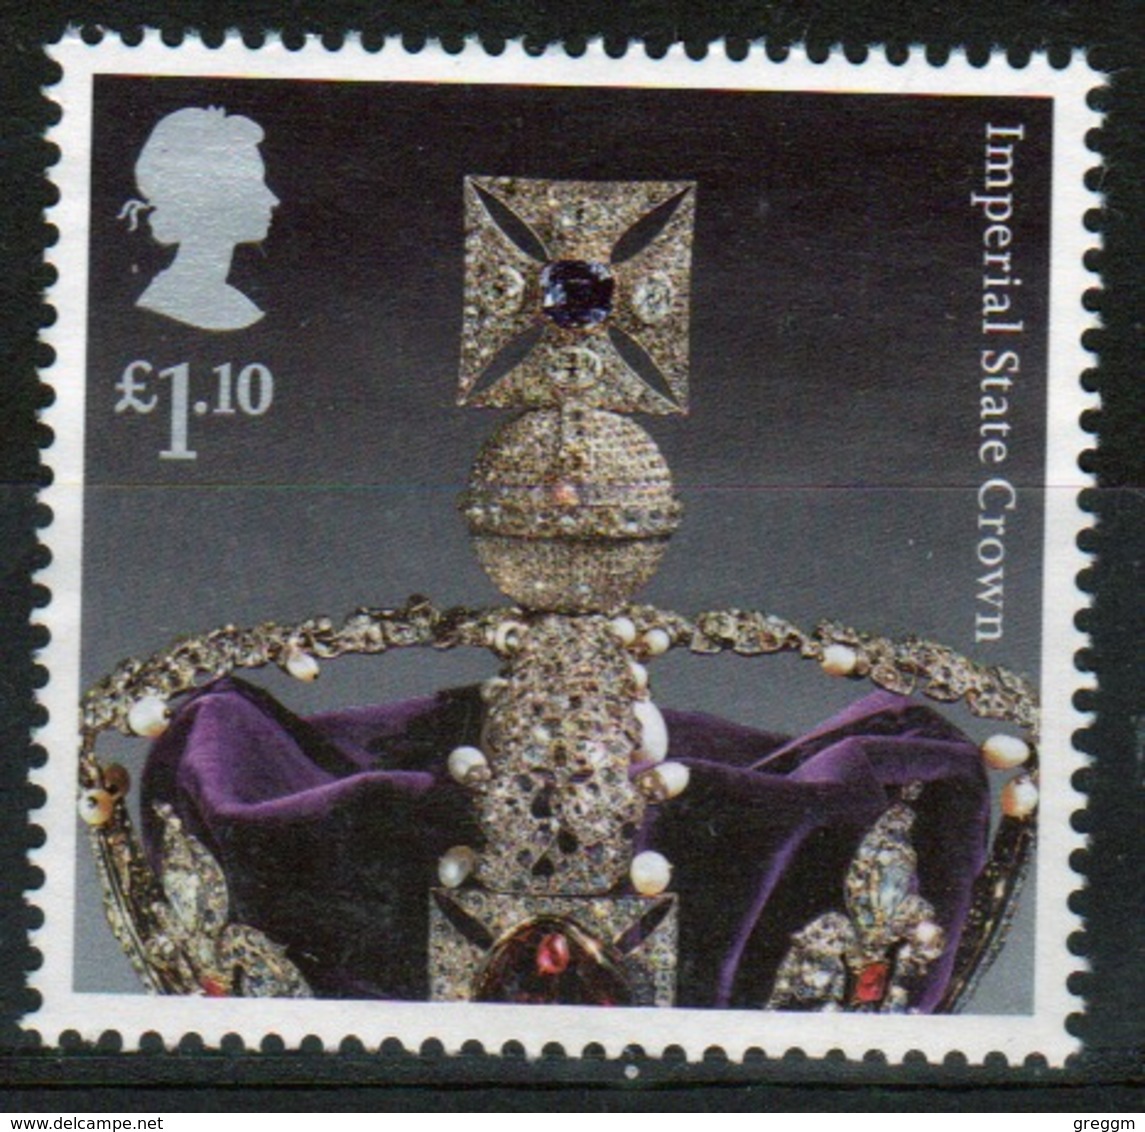 Great Britain 2011  1 X £1.10 Commemorative Stamp From The Crown Jewels Set. - Used Stamps